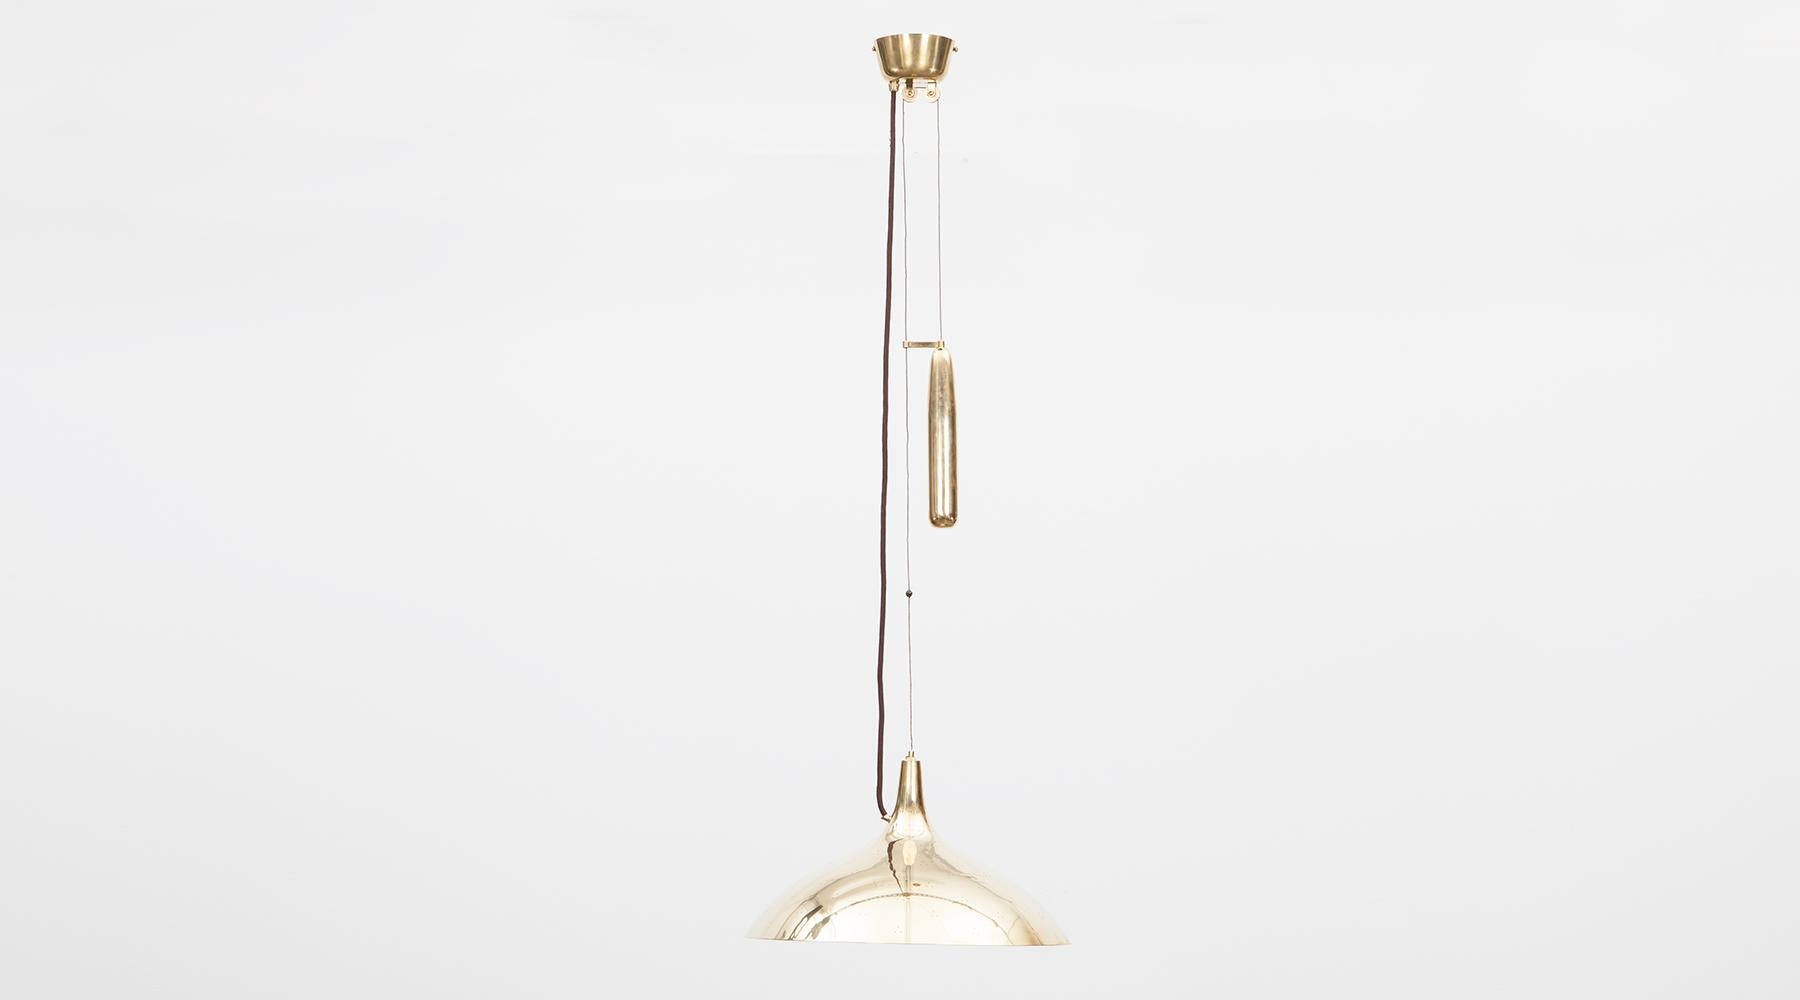 Brass and etched glass, ceiling lamp by Paavo Tynell, Finland, 1952.

Fantastic ceiling lamp by Finland Classic Paavo Tynell. His cautious hand in light design comes to full effect through this elegant yet unobtrusive ceiling lamp in brass.